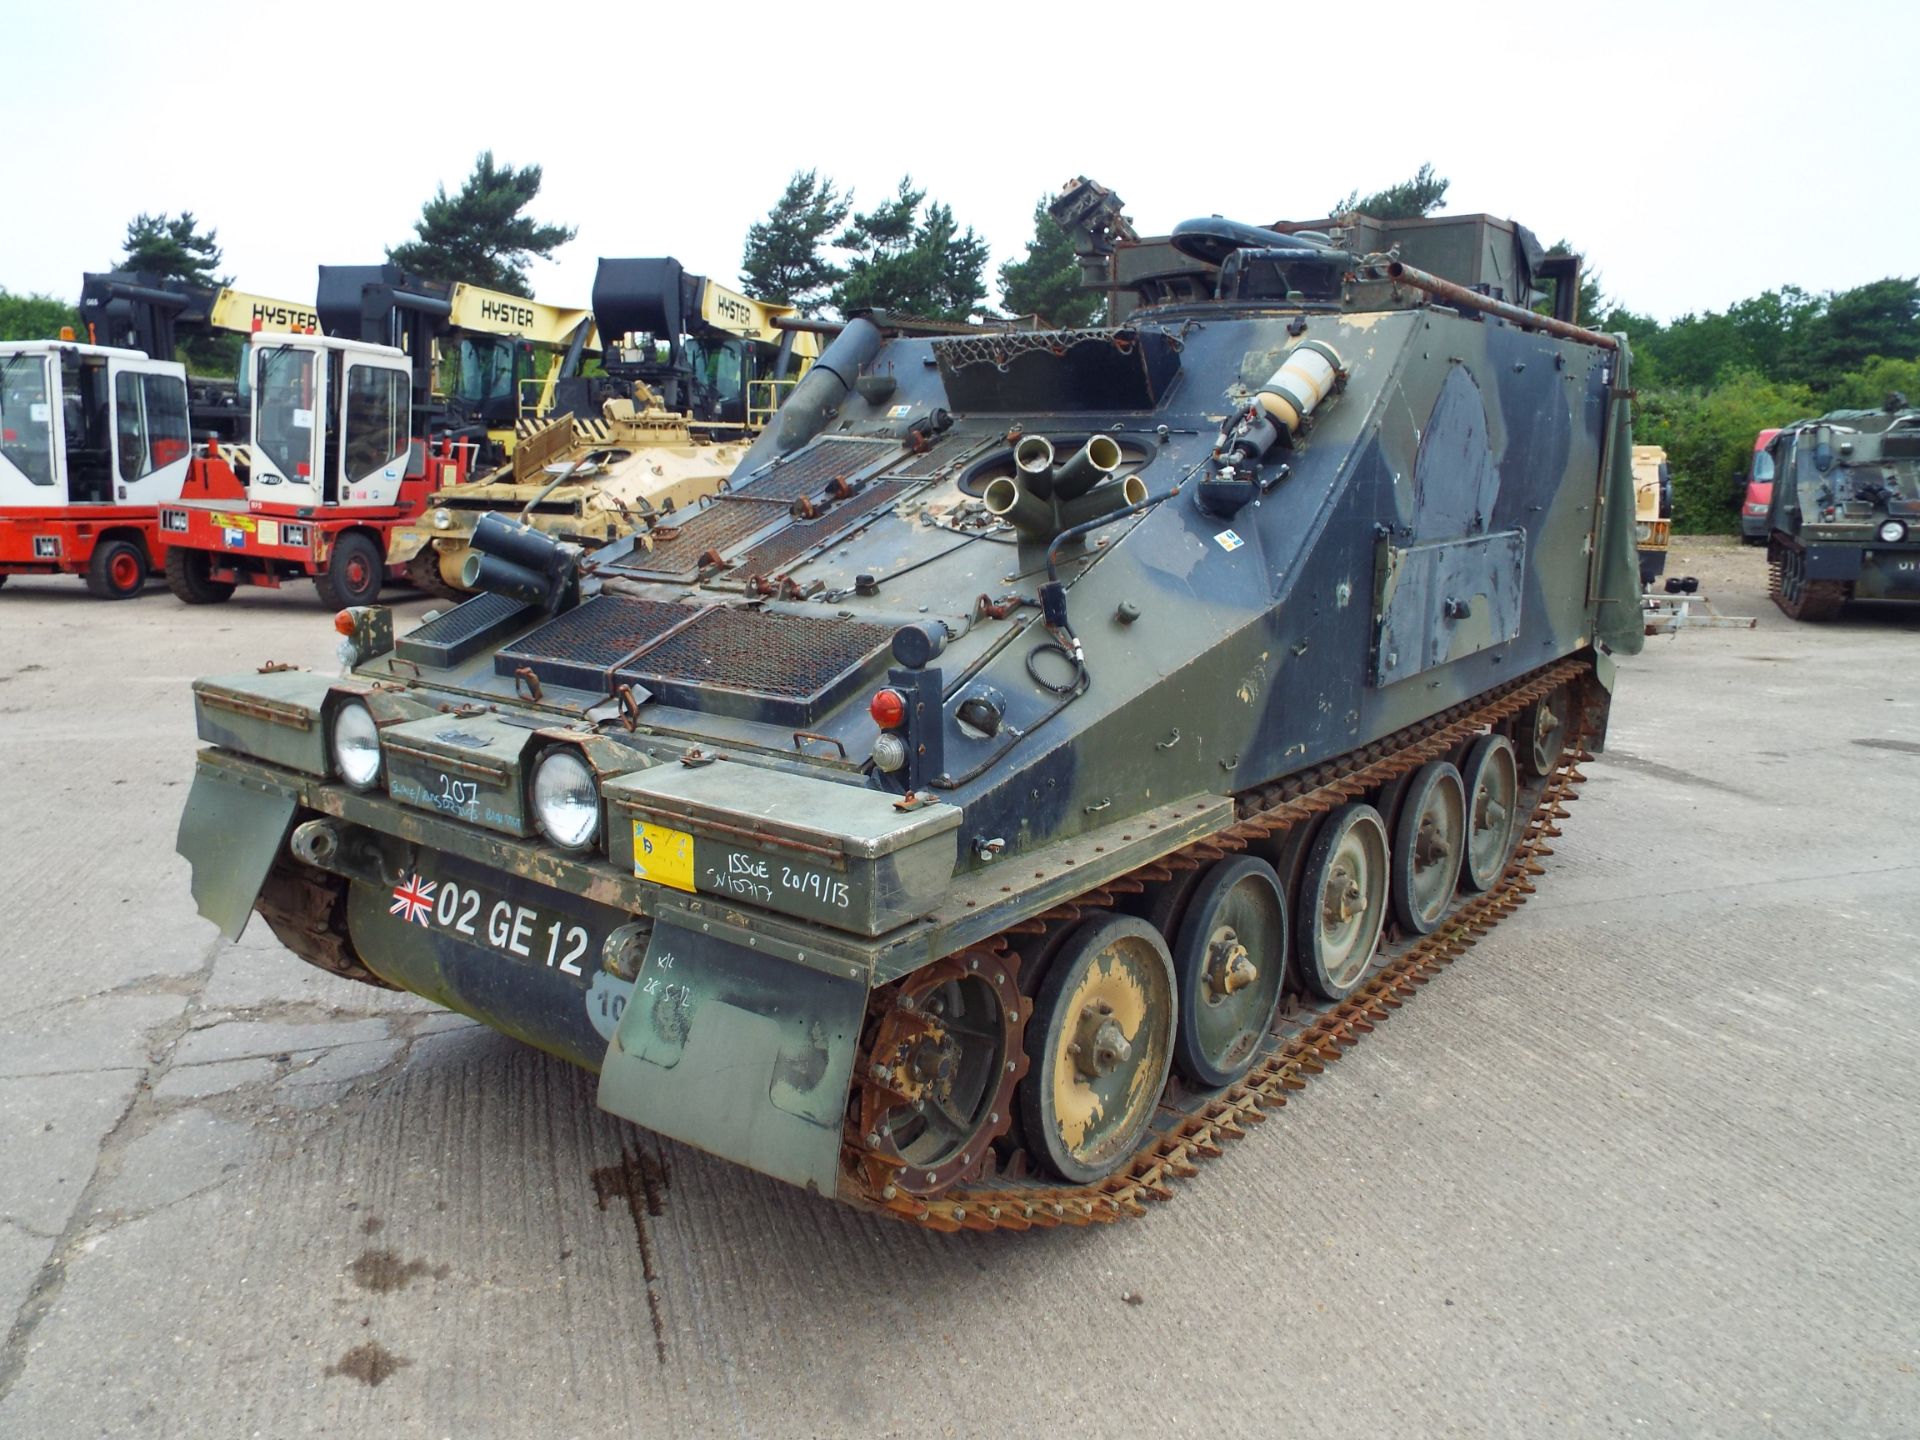 CVRT (Combat Vehicle Reconnaissance Tracked) FV105 Sultan Armoured Personnel Carrier - Image 3 of 26